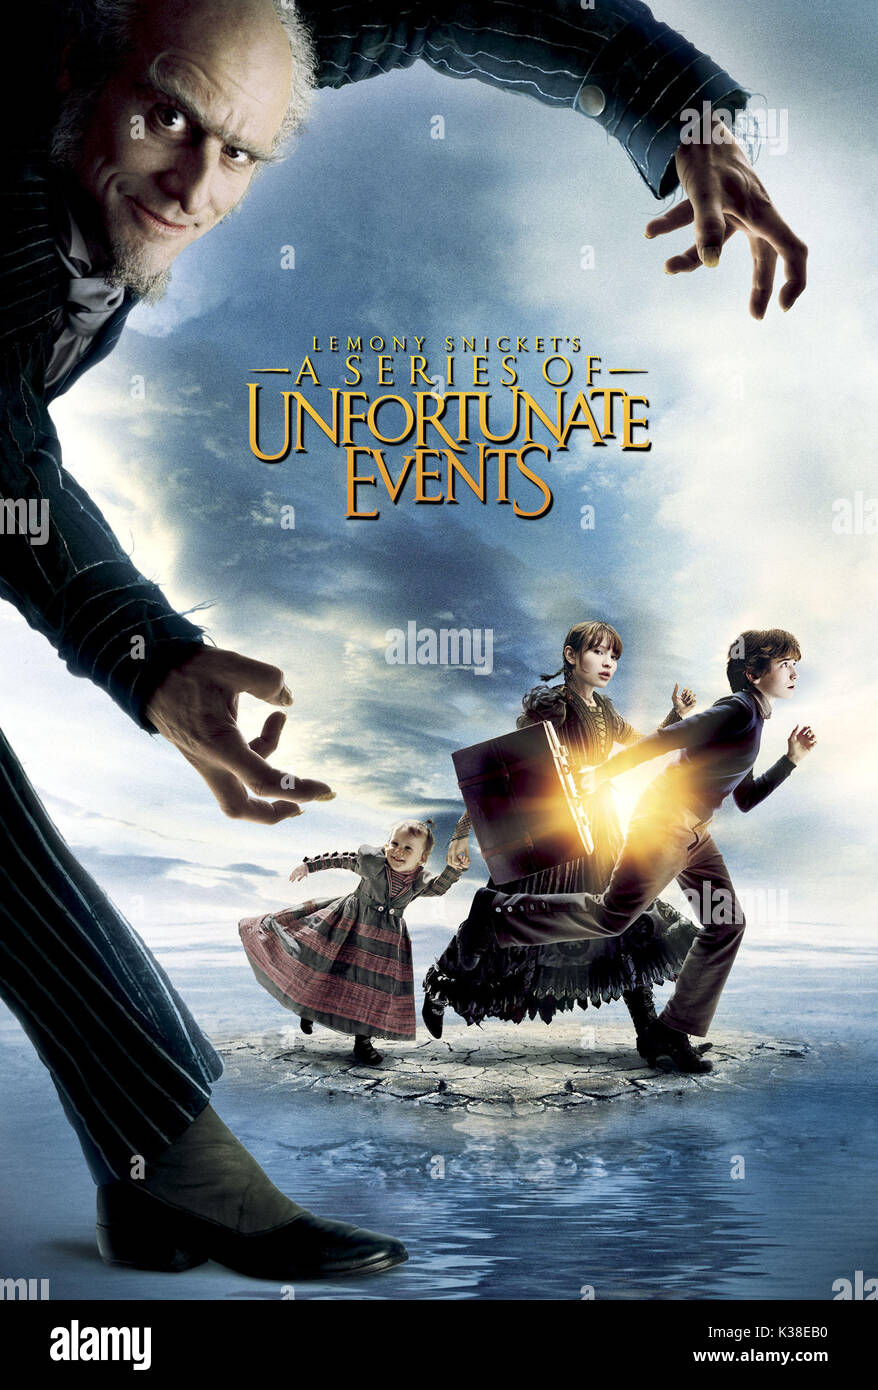 LEMONY SNICKET'S A SERIES OF UNFORTUNATE INCIDENTS (US 2004) POSTER     Date: 2004 Stock Photo